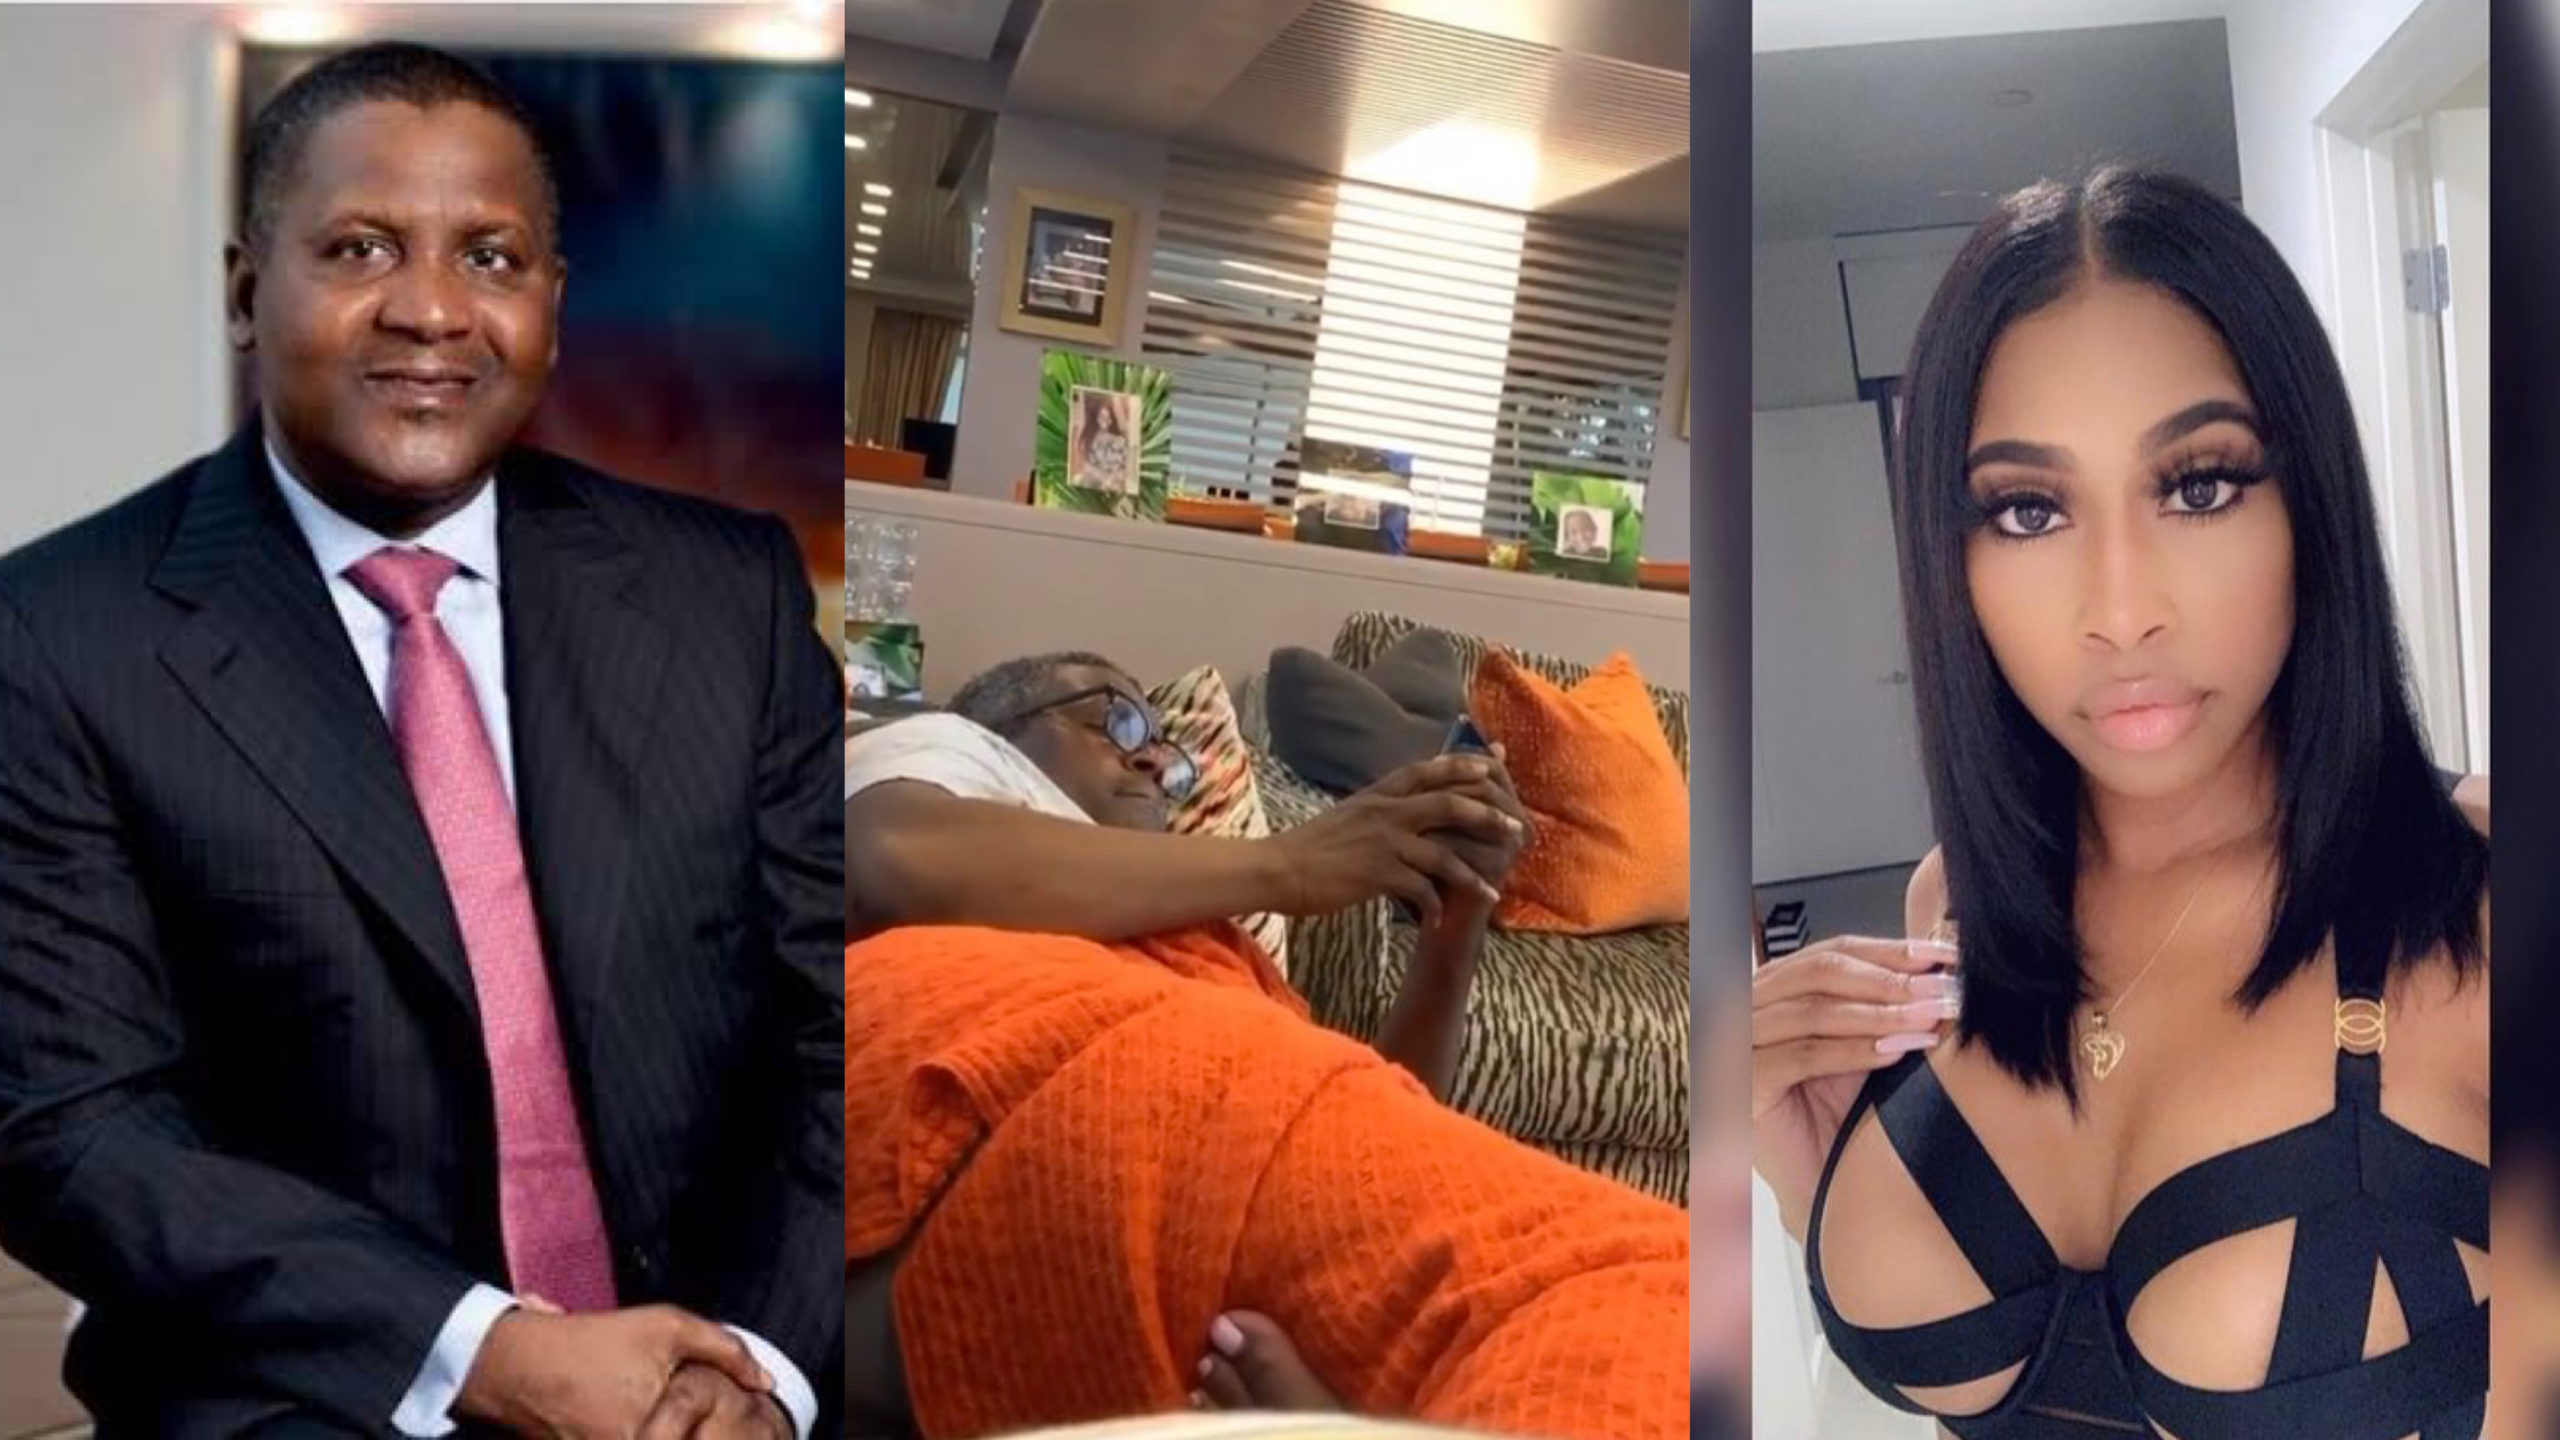 Africa's Richest Man Can't Keep It In His Pants! Aliko Dangote's Another Mistress Leaks Photos Of His Buttocks 